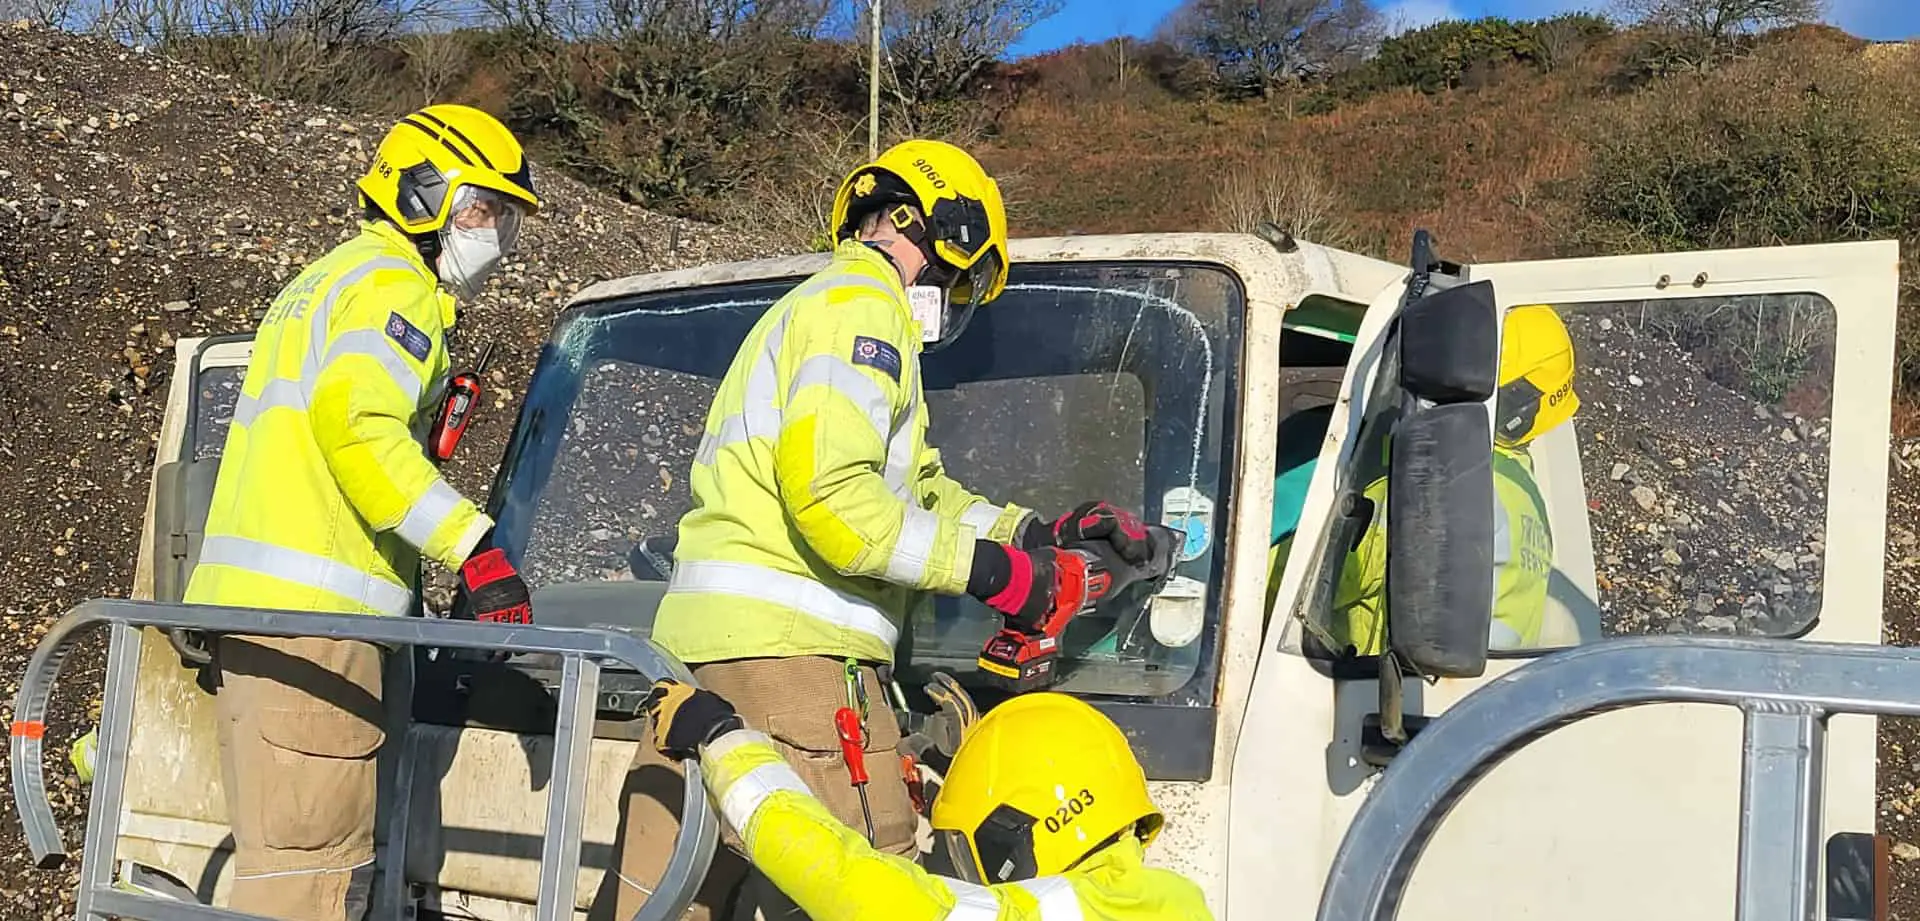 Fire crews vehicle extrication exercise at Wight Building Materials